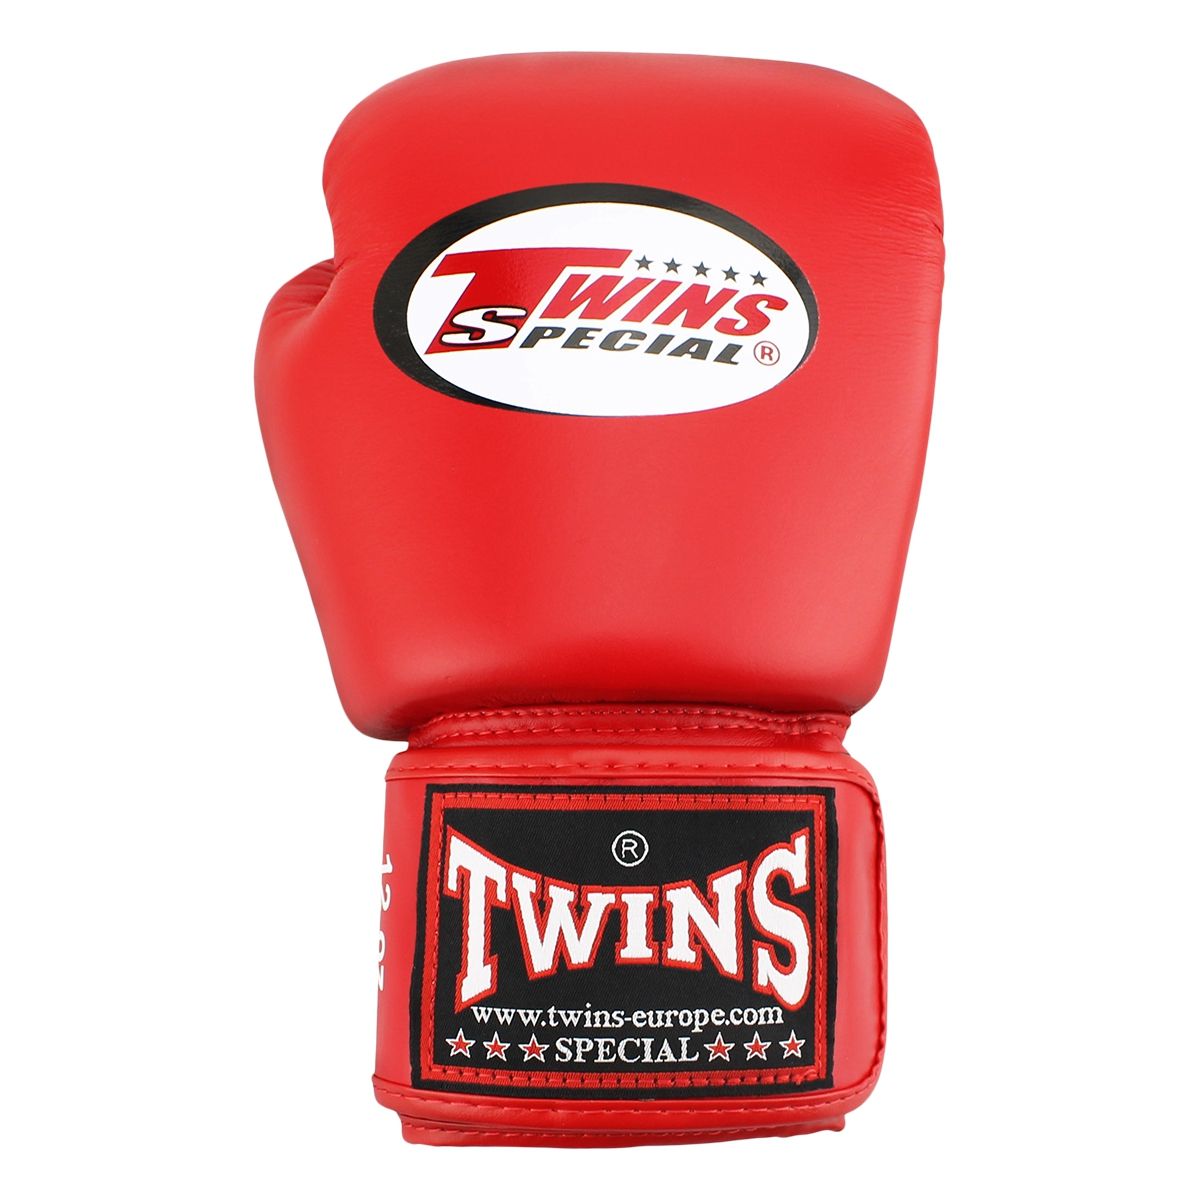 Twins Special Leather Boxing Gloves BGVL 3 RED